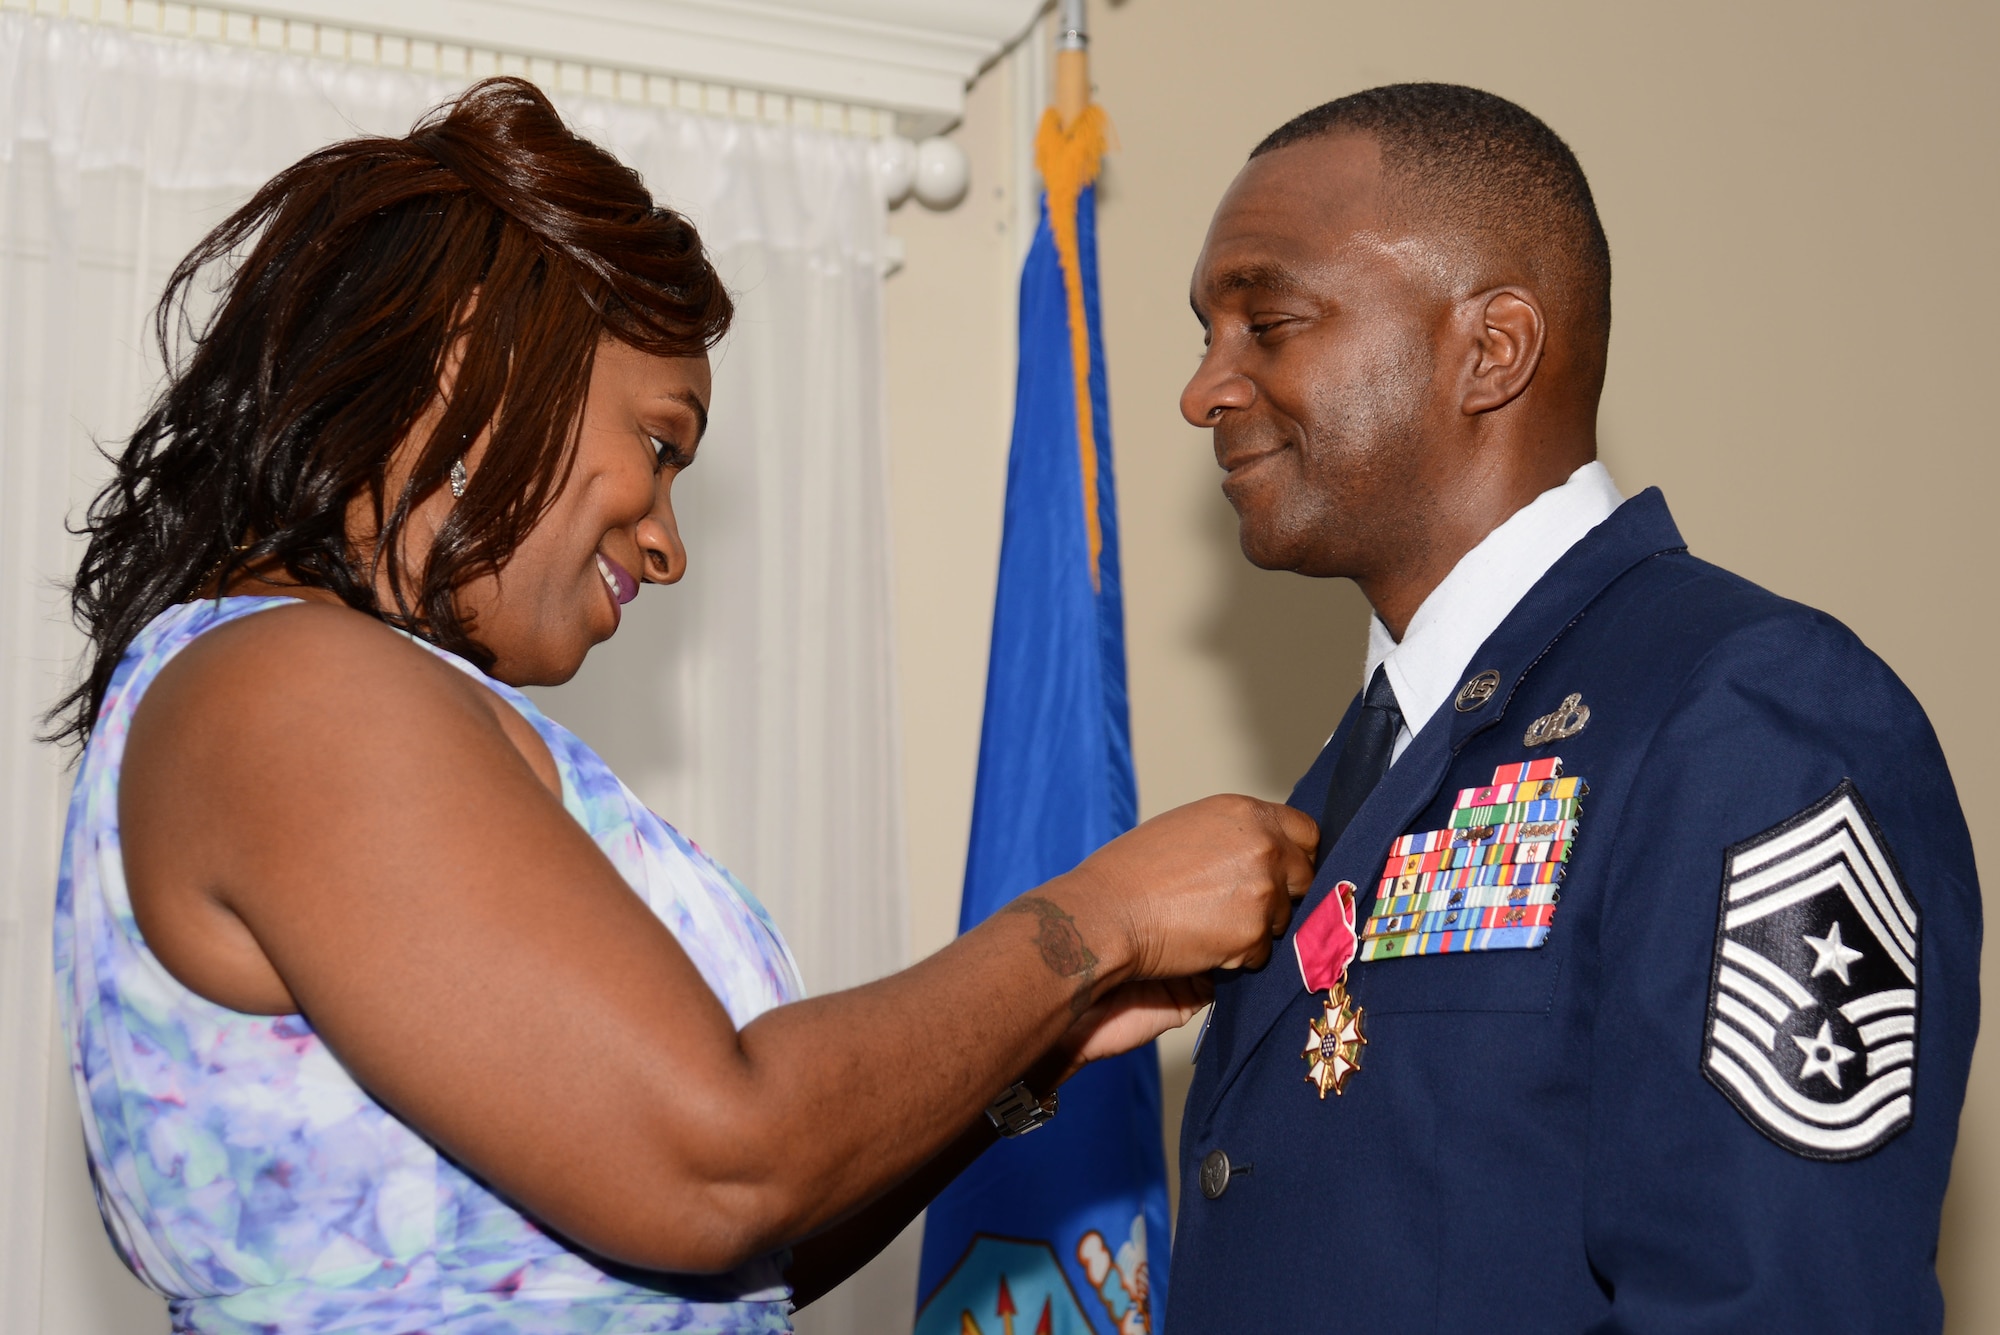 Danya McKinney places a retirement pin on Chief Master Sgt. Christopher McKinney, former 20th Fighter Wing command chief, during his retirement ceremony at Shaw Air Force Base, S.C., June 1, 2017. McKinney enlisted in August 1987 as a weather forecaster, serving in 17 duty positions across the globe including some in support of Operations Joint Endeavor, Iraqi Freedom and Enduring Freedom before becoming the command chief of the 20th FW. (U.S. Air Force photo by Airman 1st Class Kathryn R.C. Reaves)